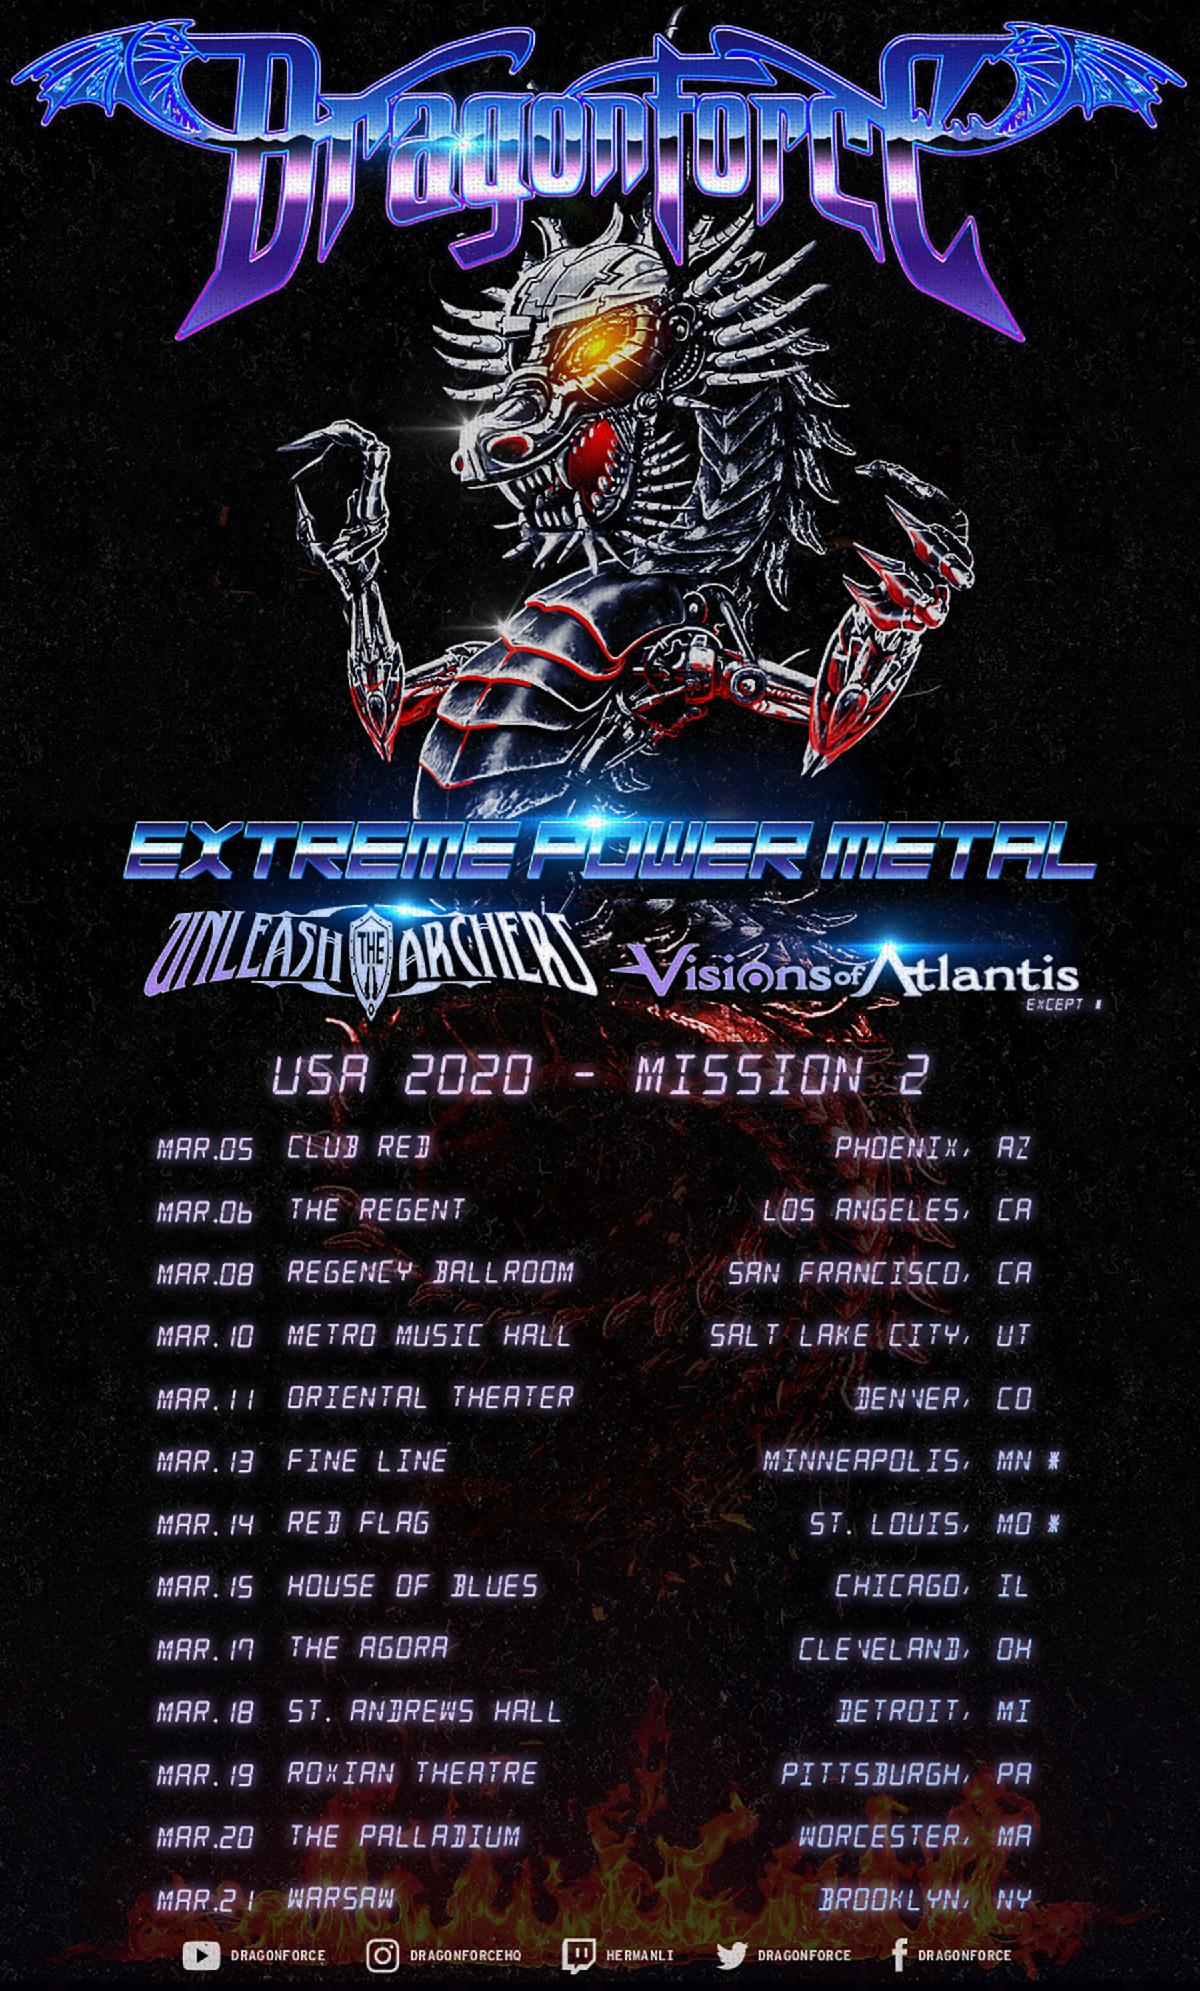 DRAGONFORCE Announces US Headlining Trek With Unleash The Archers And Visions Of Atlantis; Alicia Vigil (Vigil Of War) To Handle Bass/Backing Vocals On Upcoming Tours